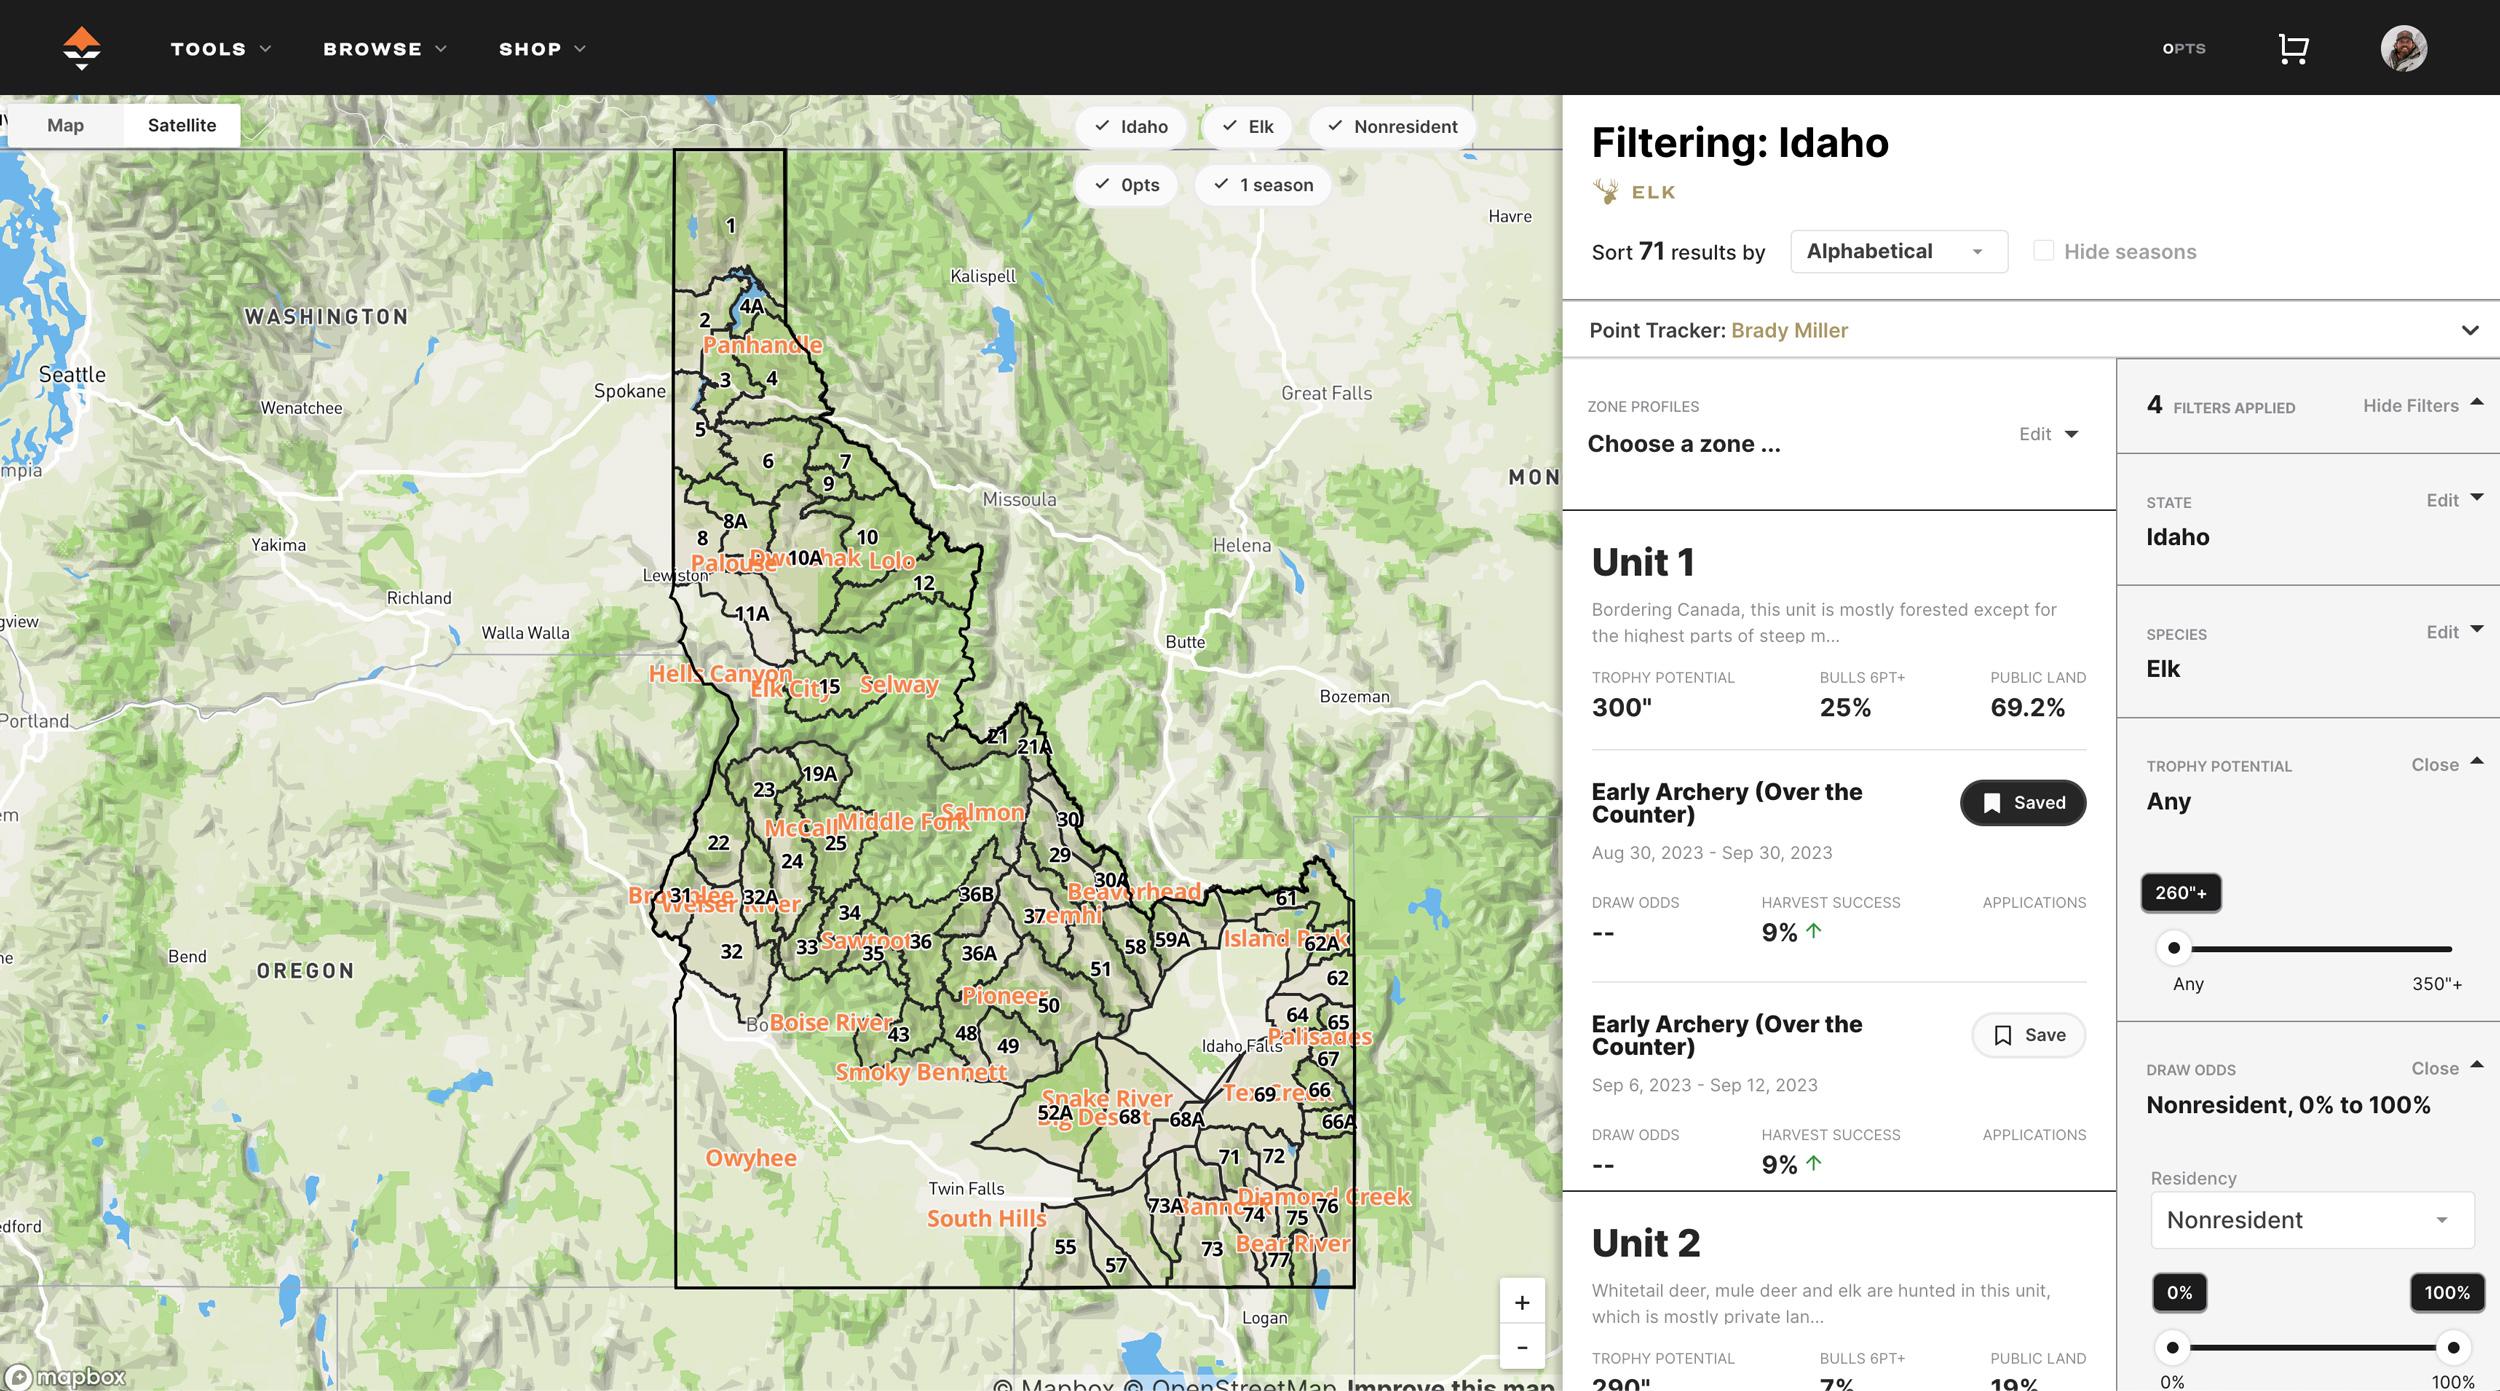 Researching for elk units in Idaho on GOHUNT Filtering